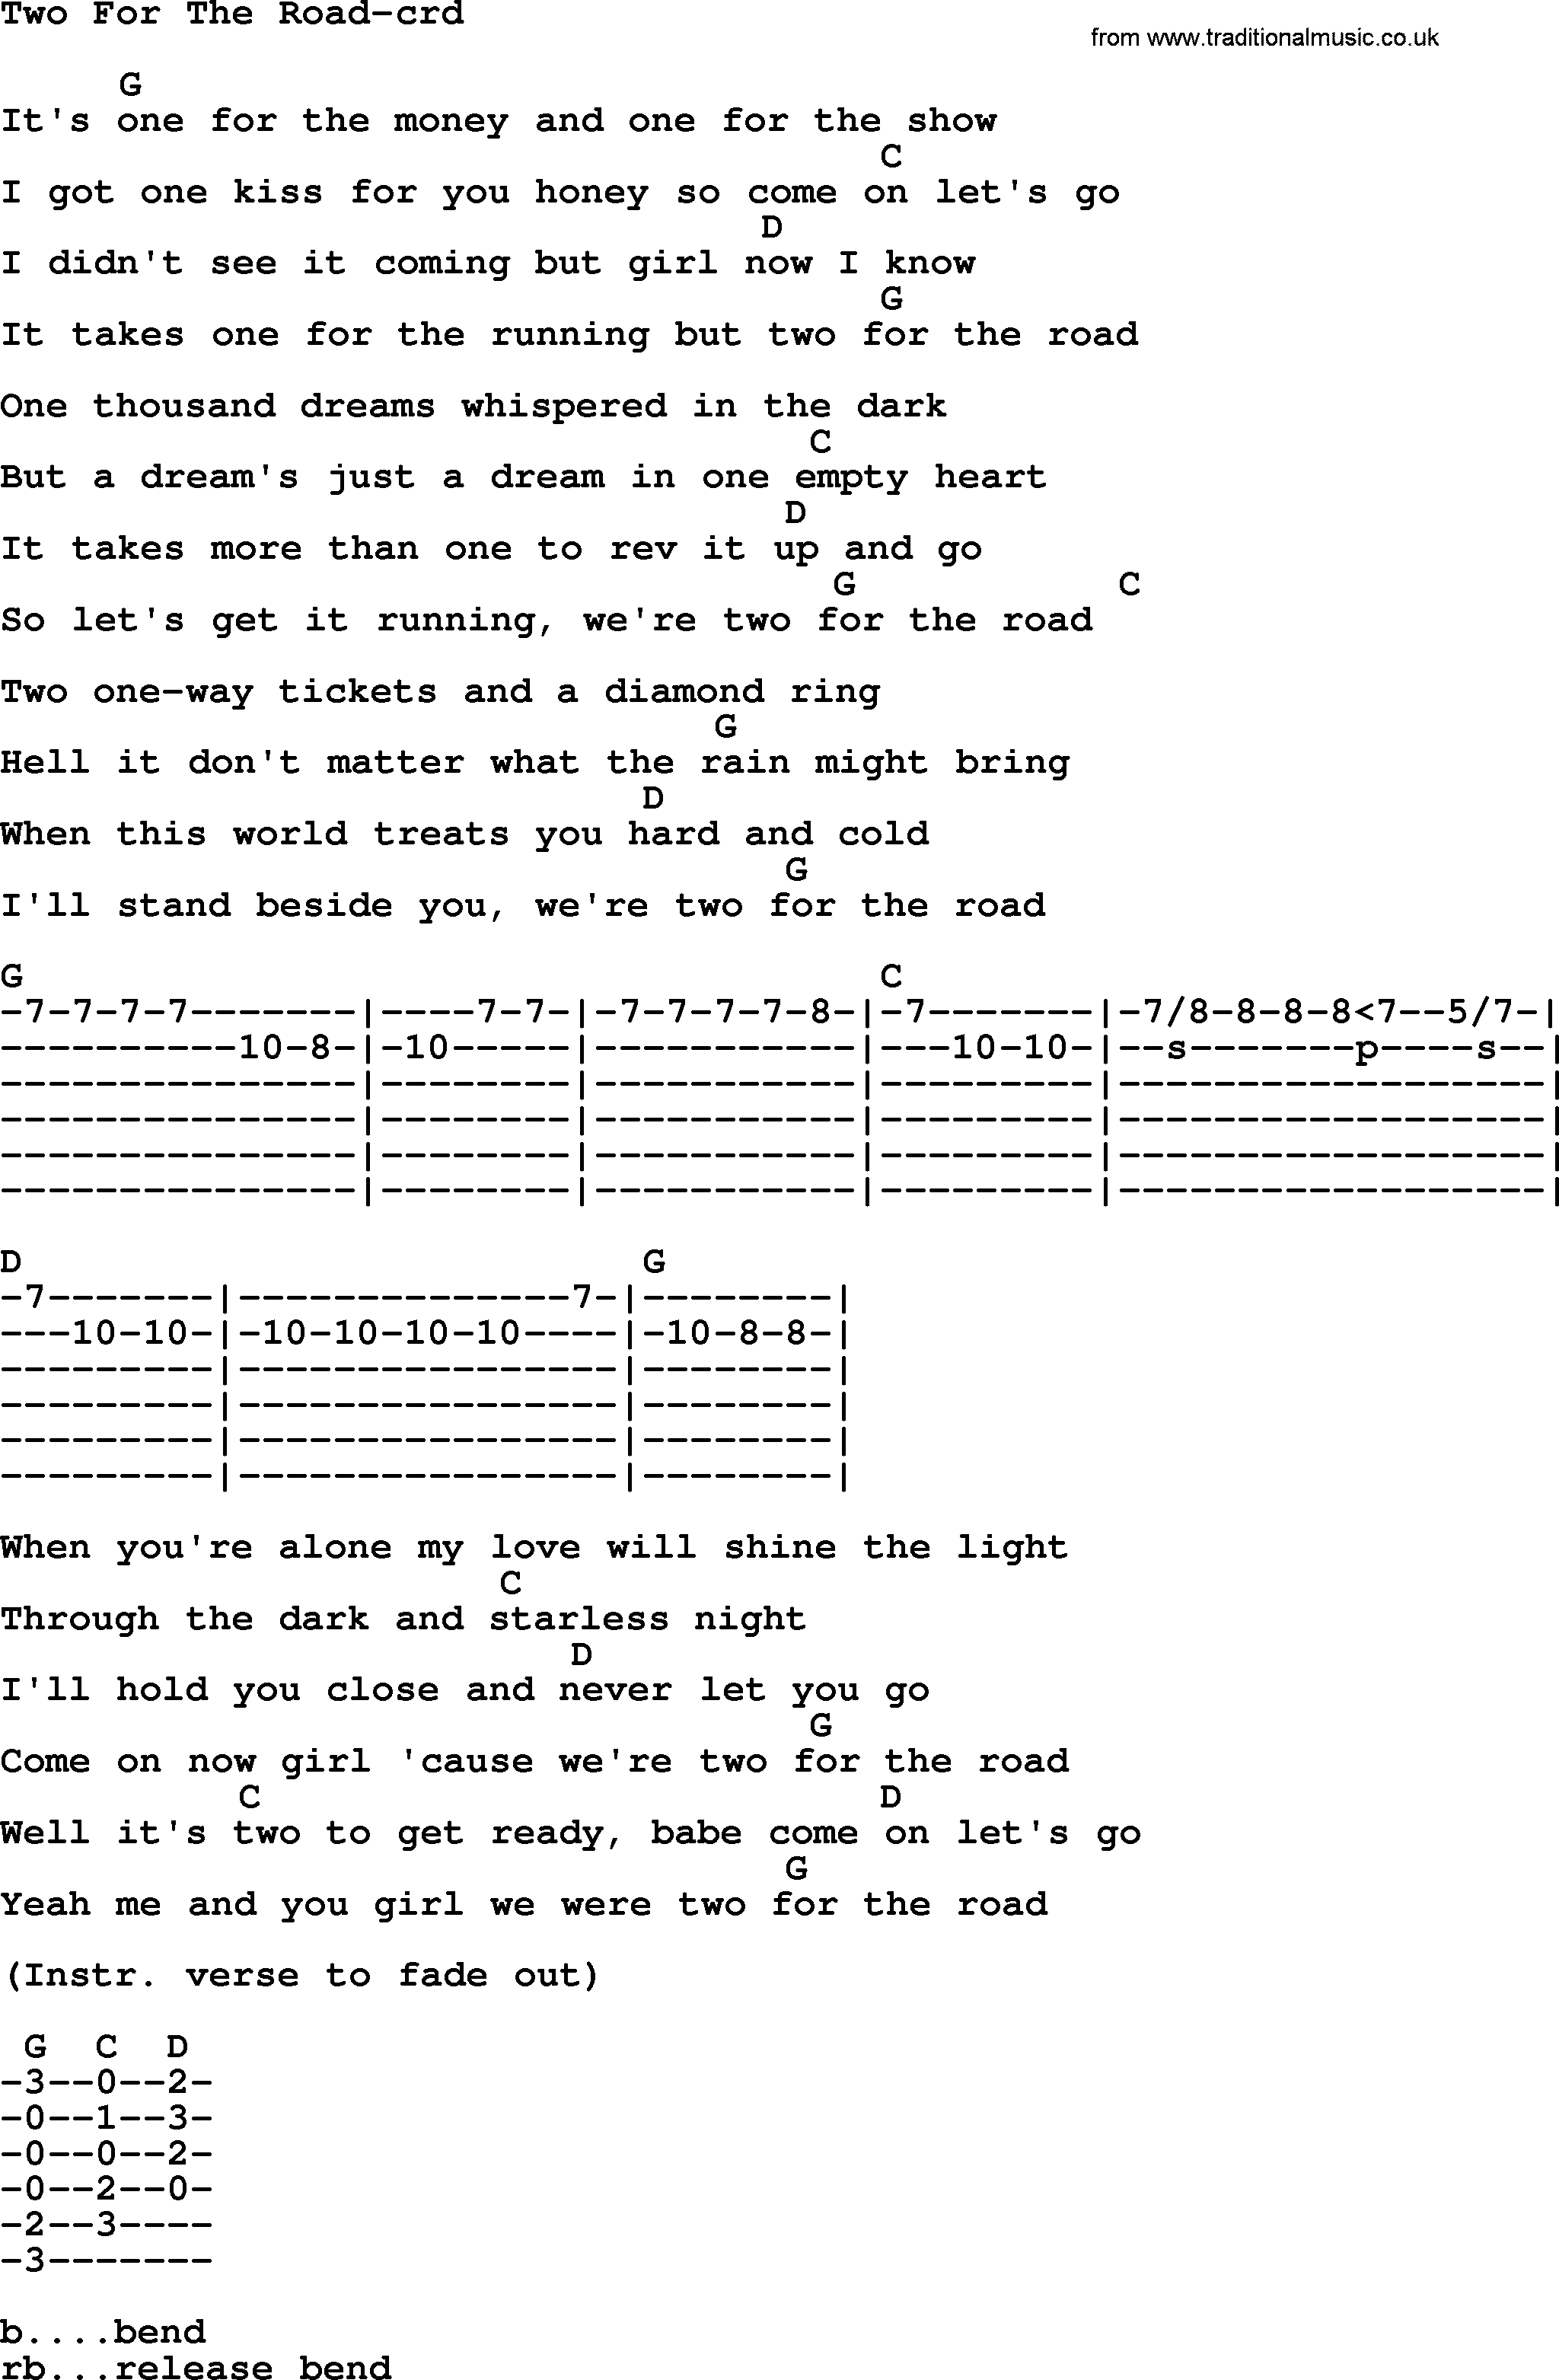 Bruce Springsteen song: Two For The Road, lyrics and chords